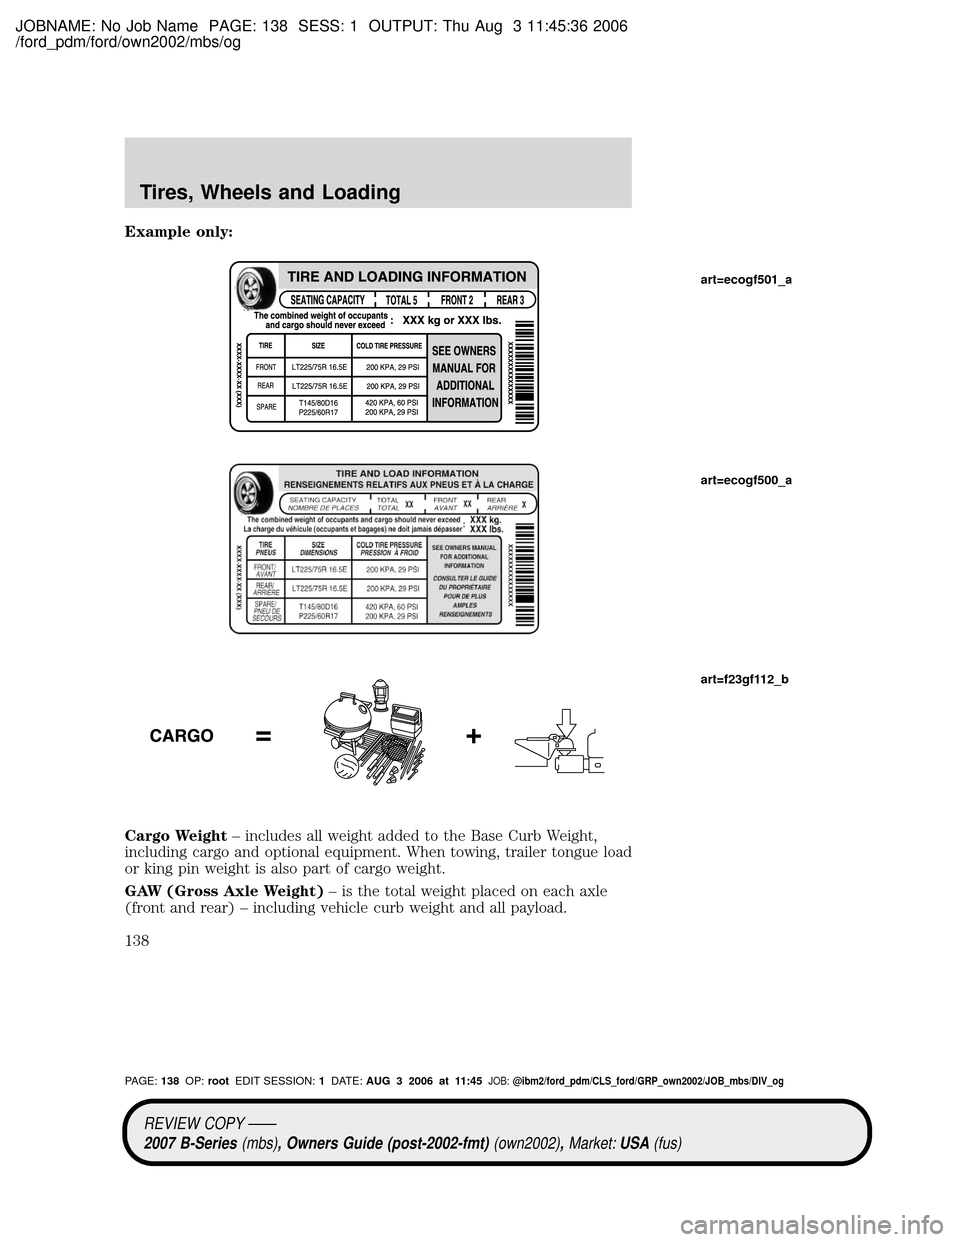 MAZDA MODEL B4000 TRUCK 2007  Owners Manual (in English) JOBNAME: No Job Name PAGE: 138 SESS: 1 OUTPUT: Thu Aug 3 11:45:36 2006
/ford_pdm/ford/own2002/mbs/og
Example only:
Cargo Weight± includes all weight added to the Base Curb Weight,
including cargo and